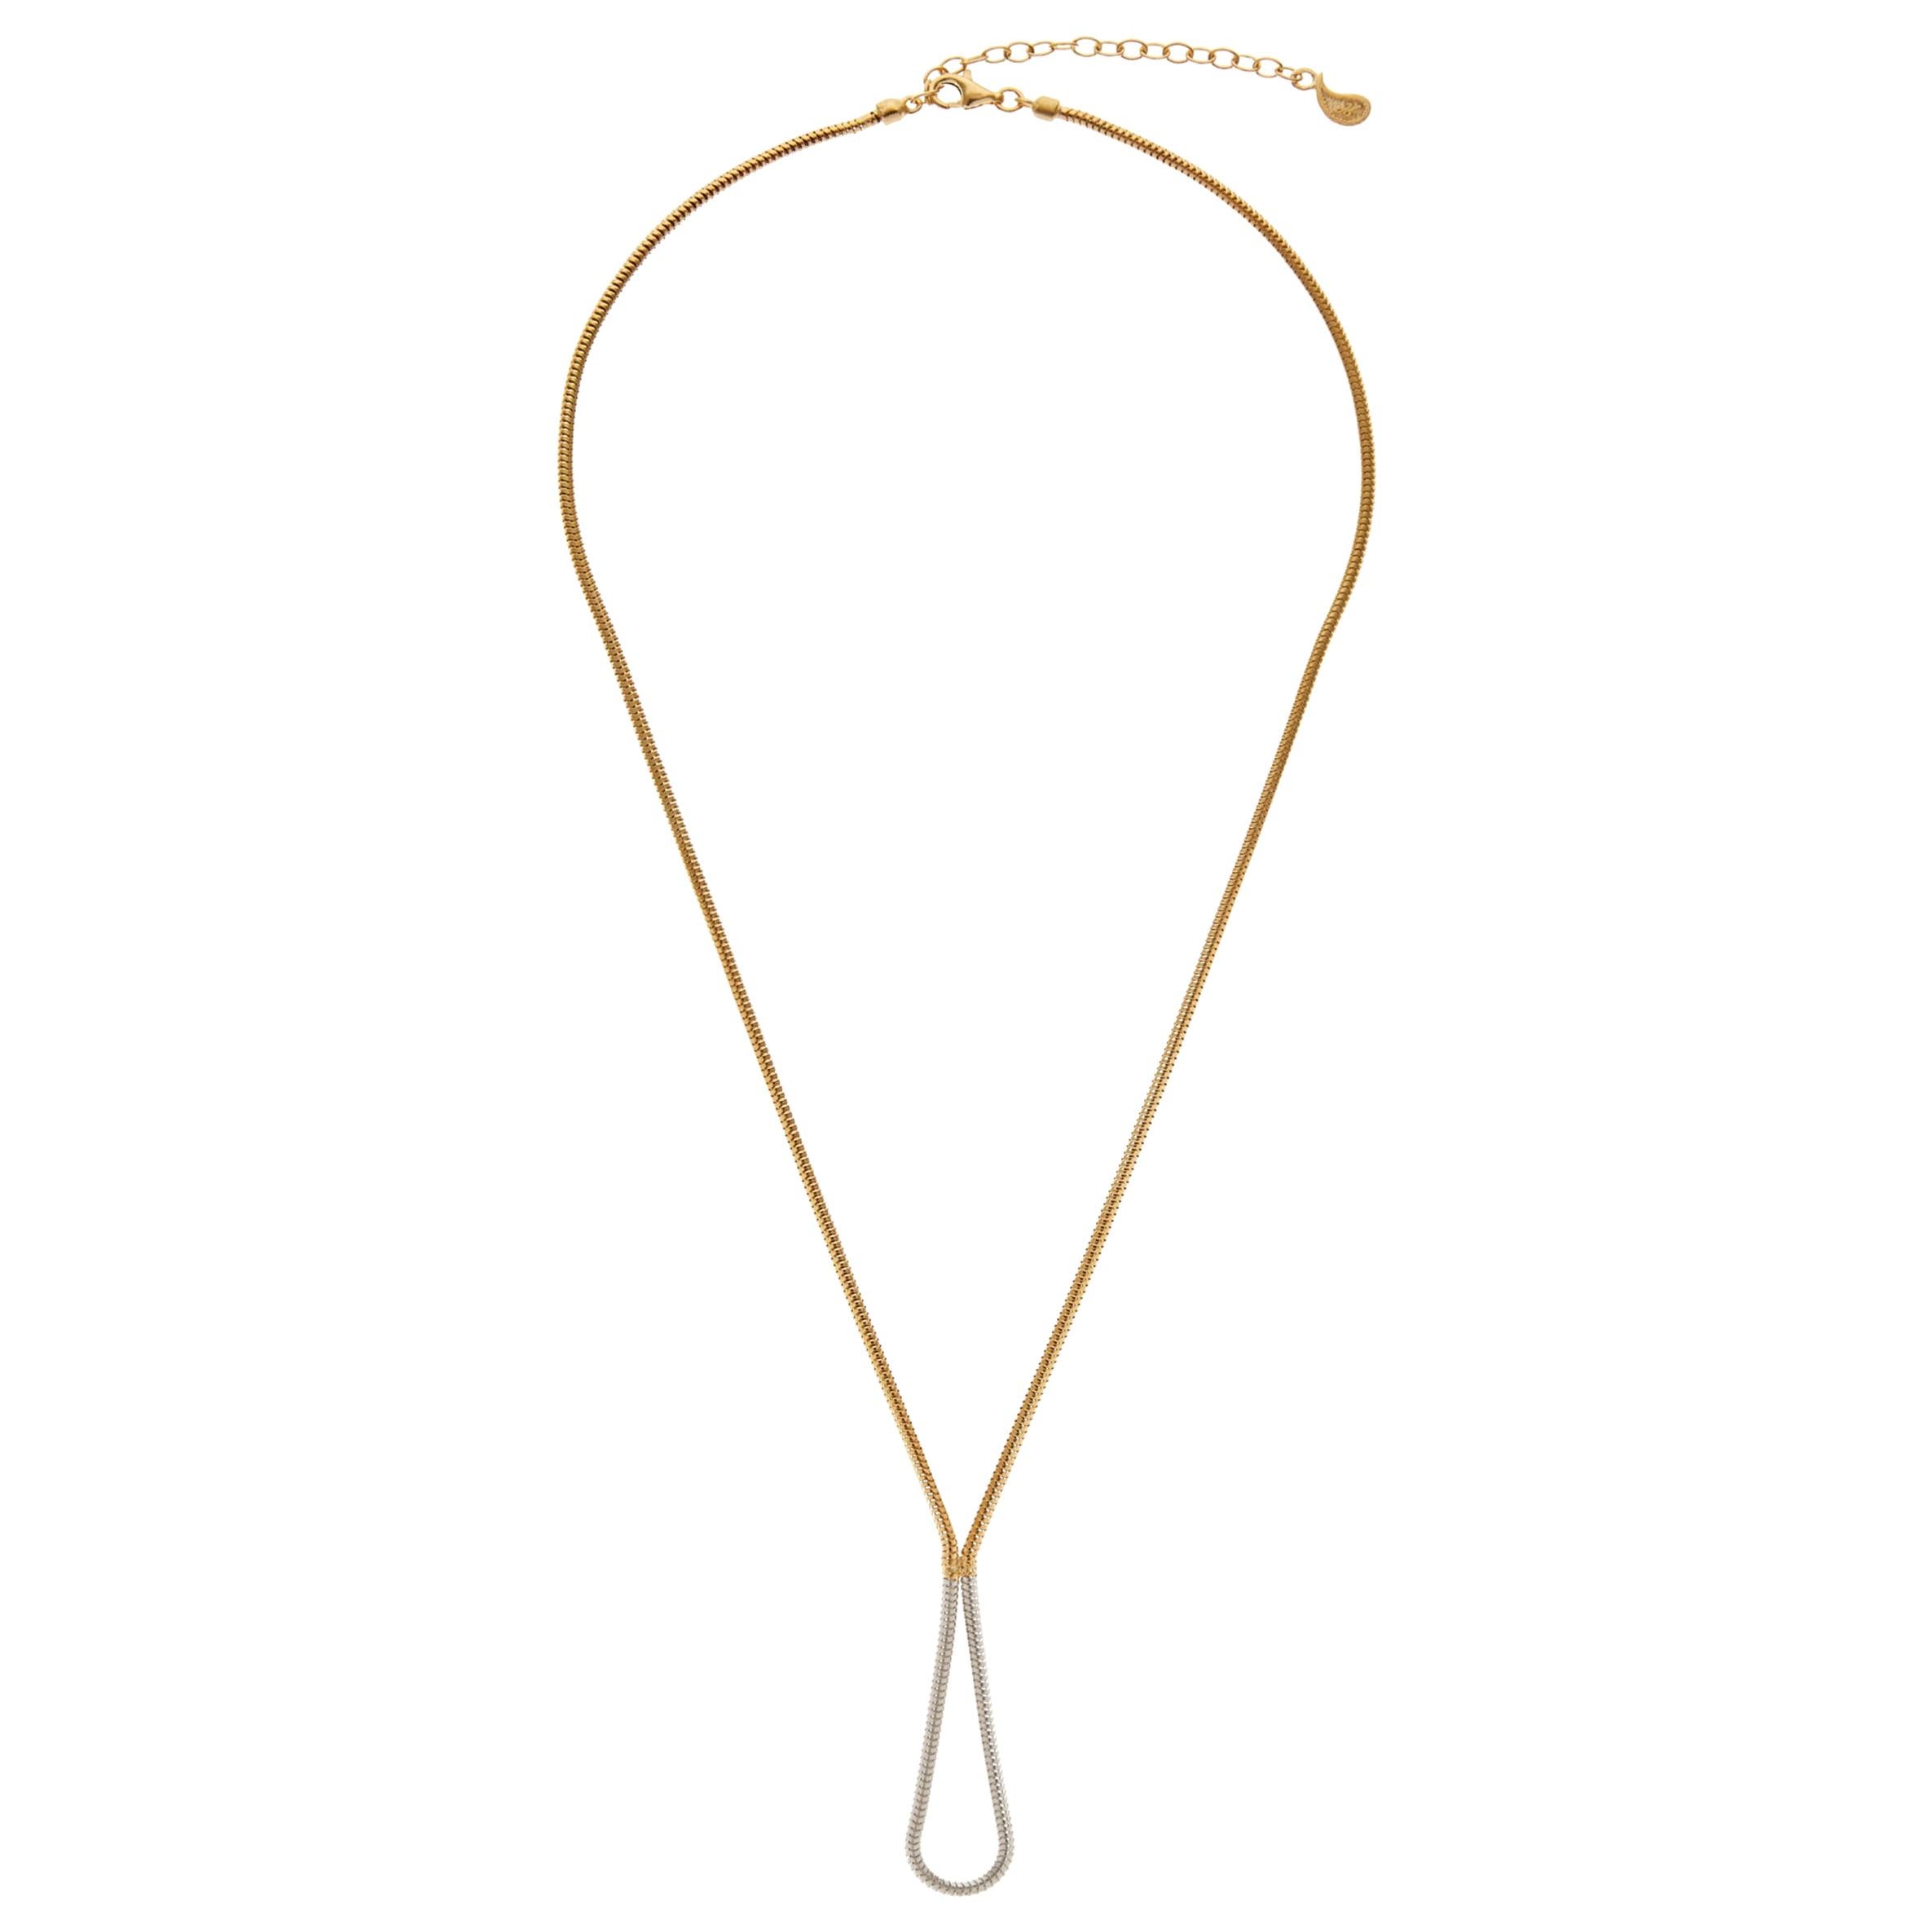 Silver Gold-Plated Necklace Minimal Short Snake Chain Greek Jewelry